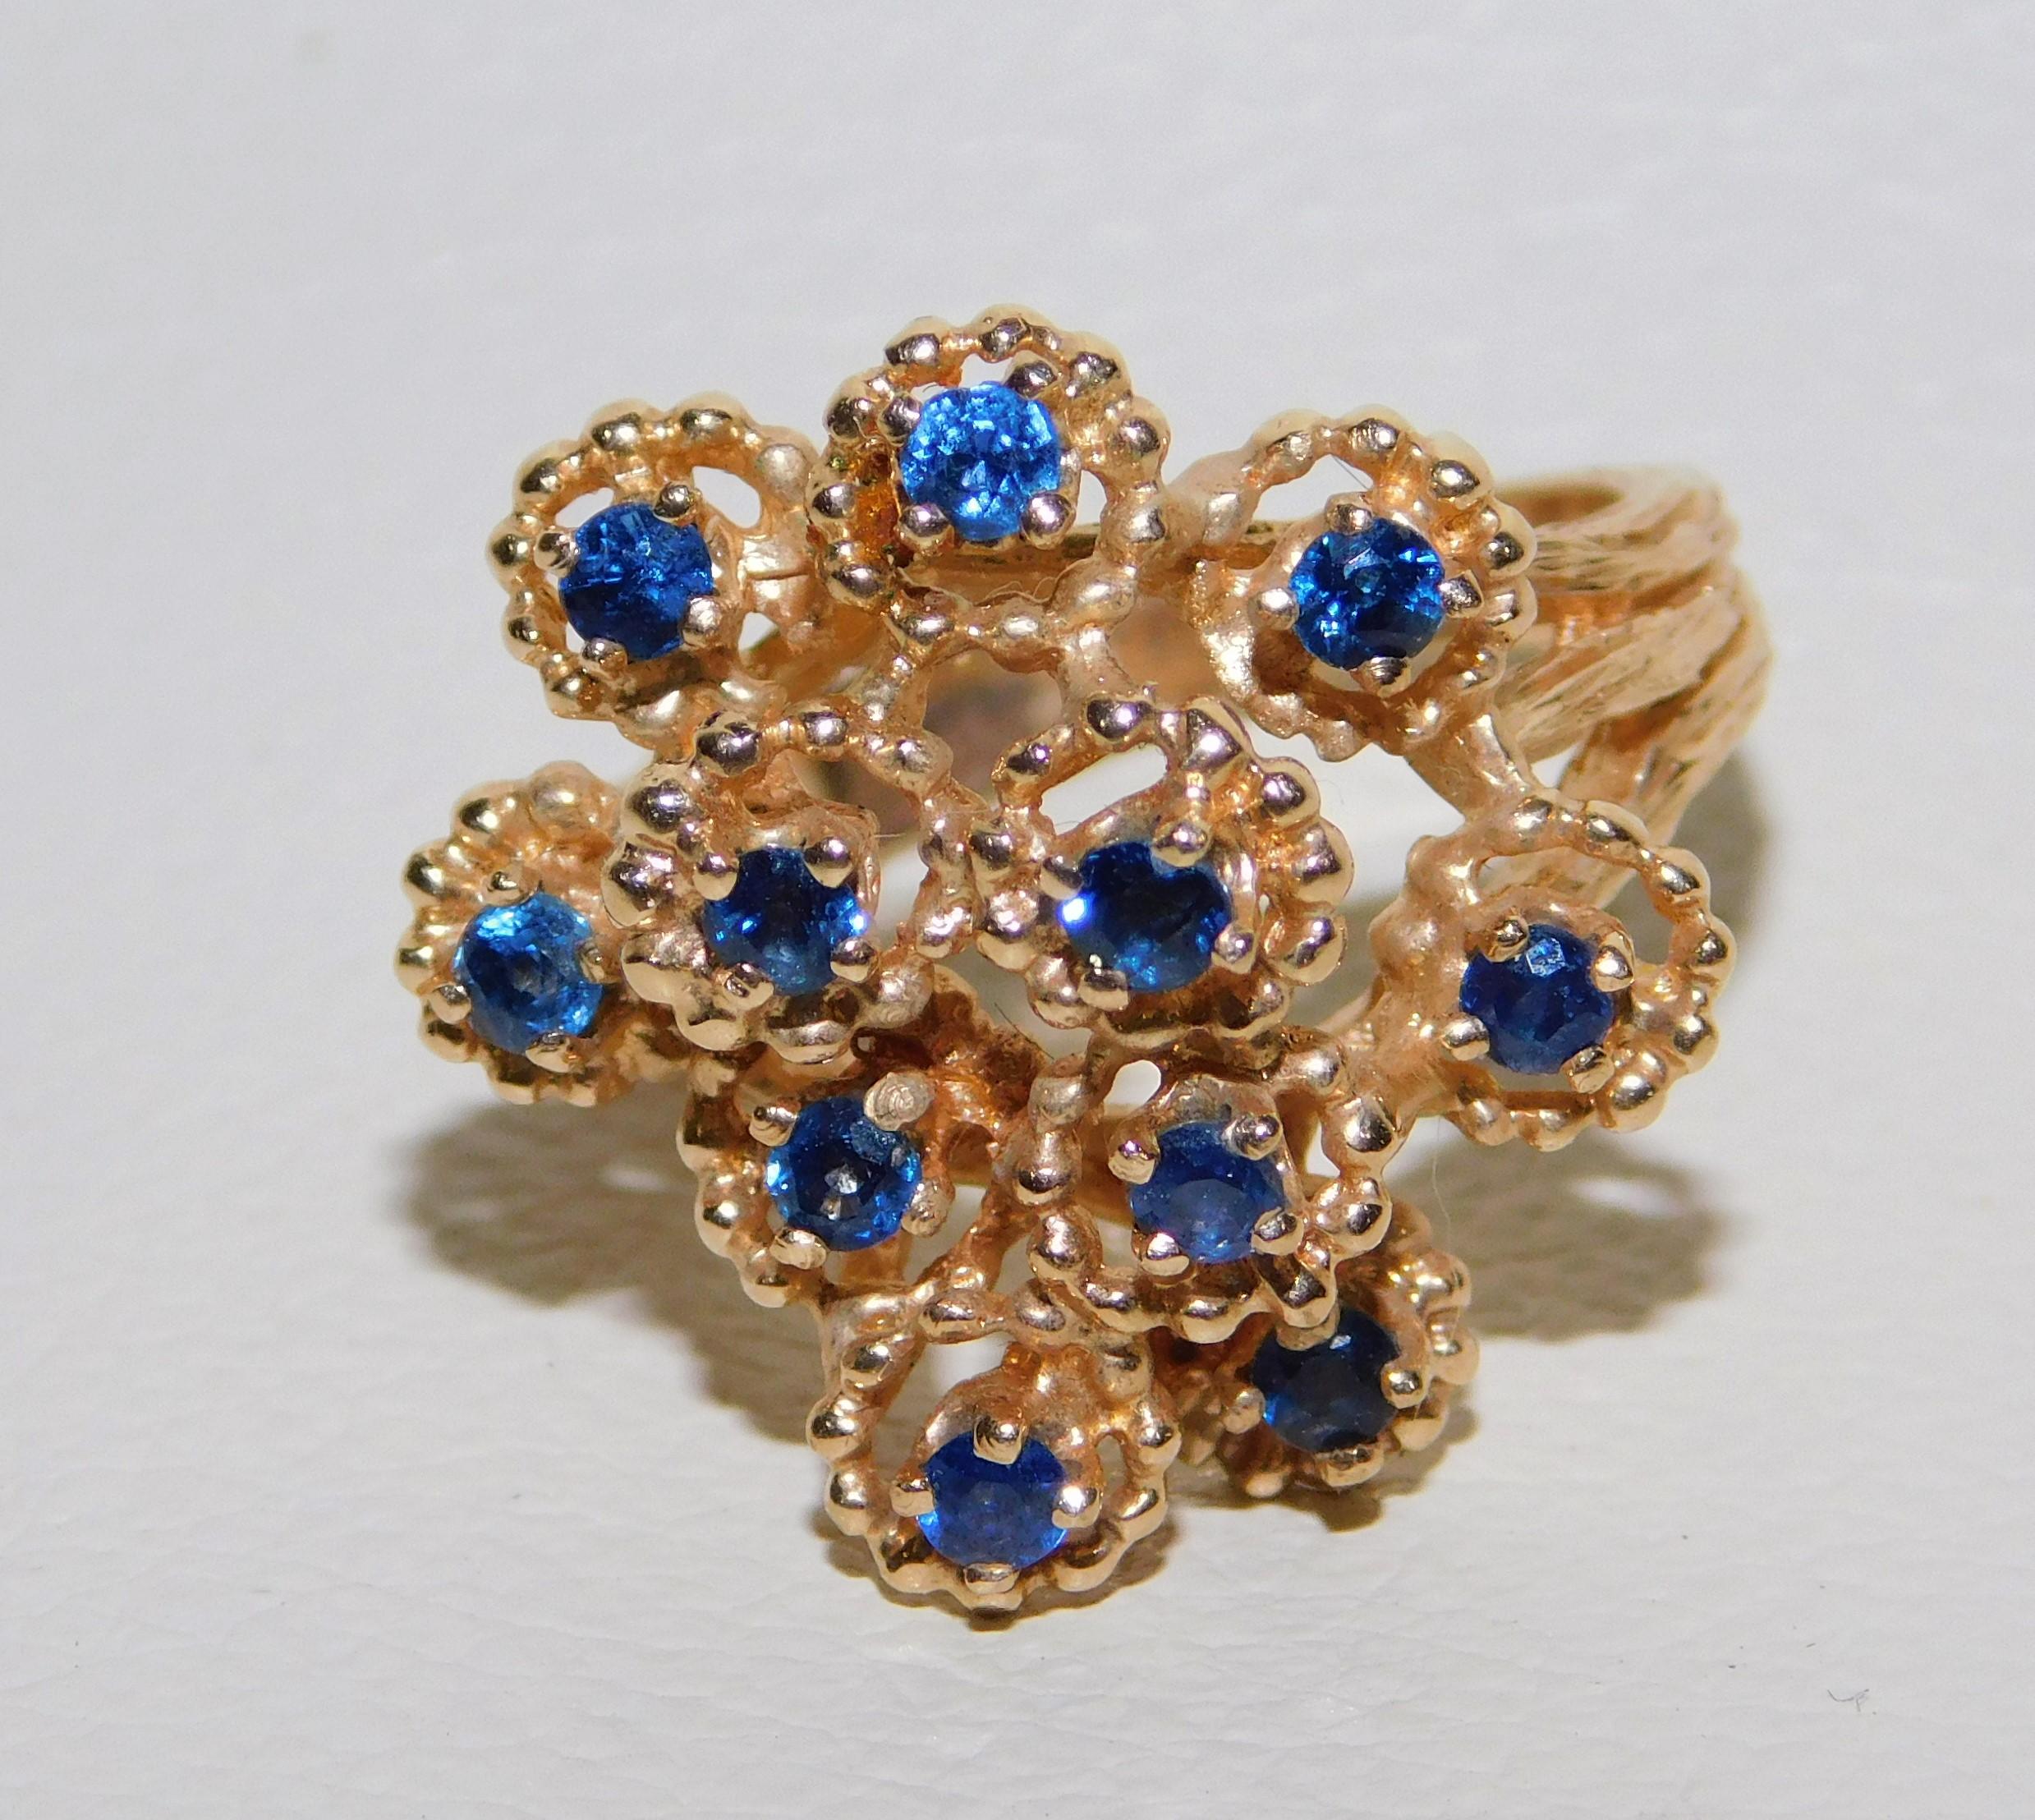 Stamped 14-karat yellow gold ladies gemstone ring with a bright polish and textured finish. Condition is very good. Ladies cocktail ring with blue sapphire gemstones in a floral design. Each gem is surrounded by a textured gold detail. Shank